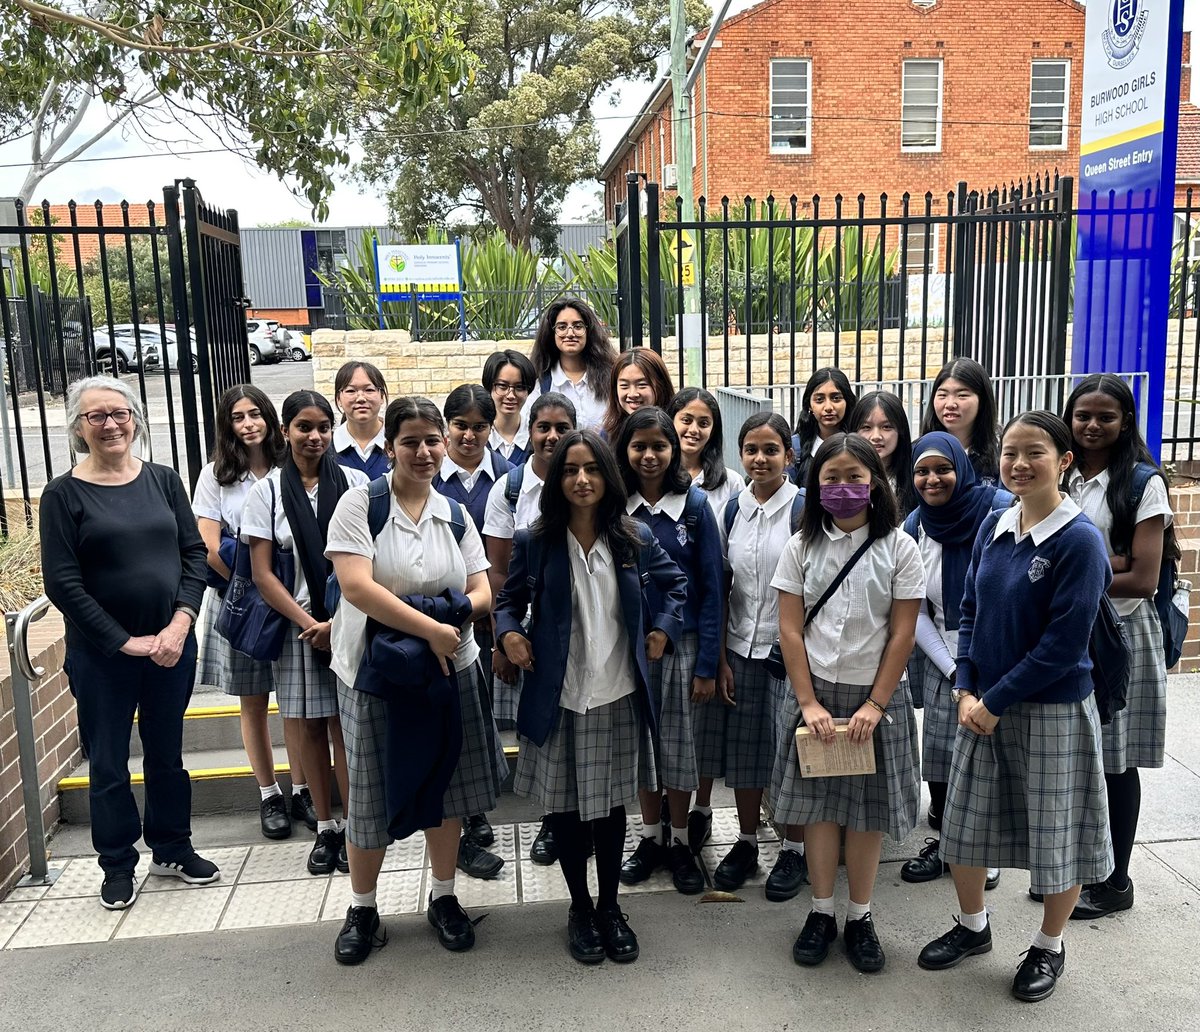 Welcome to students @StrathfieldGHS who participated in Inquisitive Minds, an inter school mathematics competition @burwoodghs